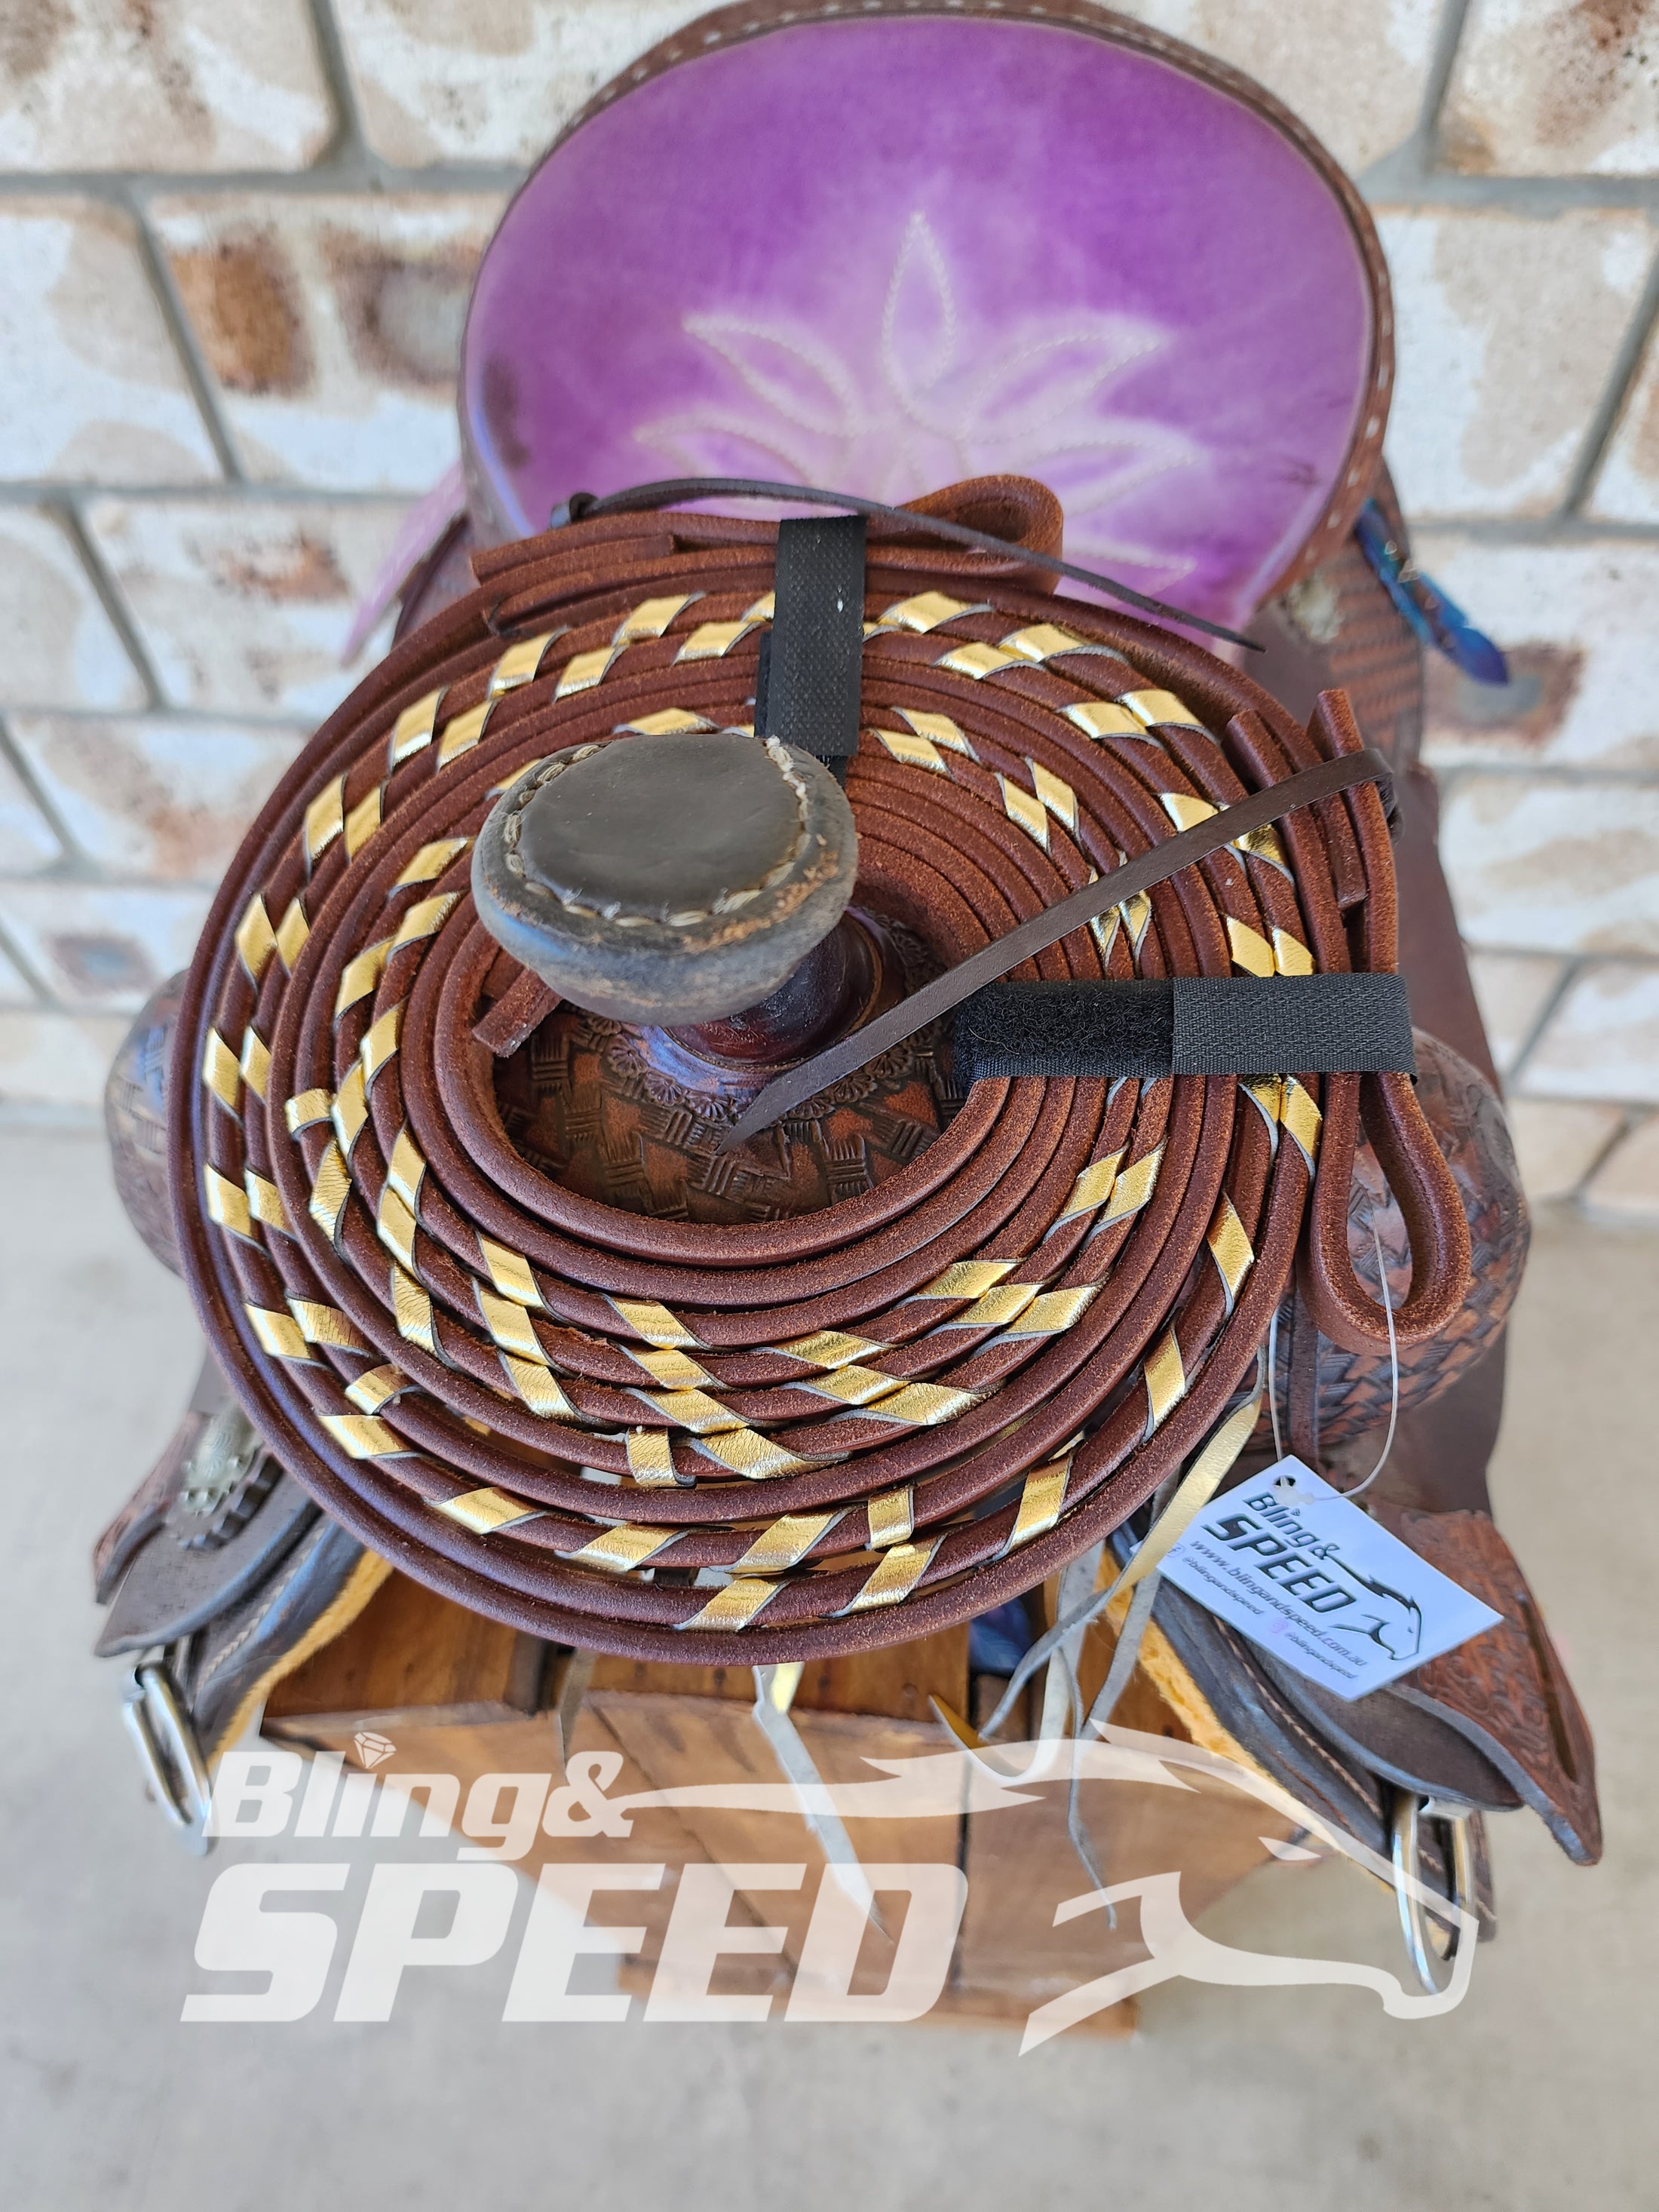 Bling & Speed Gold Laced Split Reins (7897871614190)